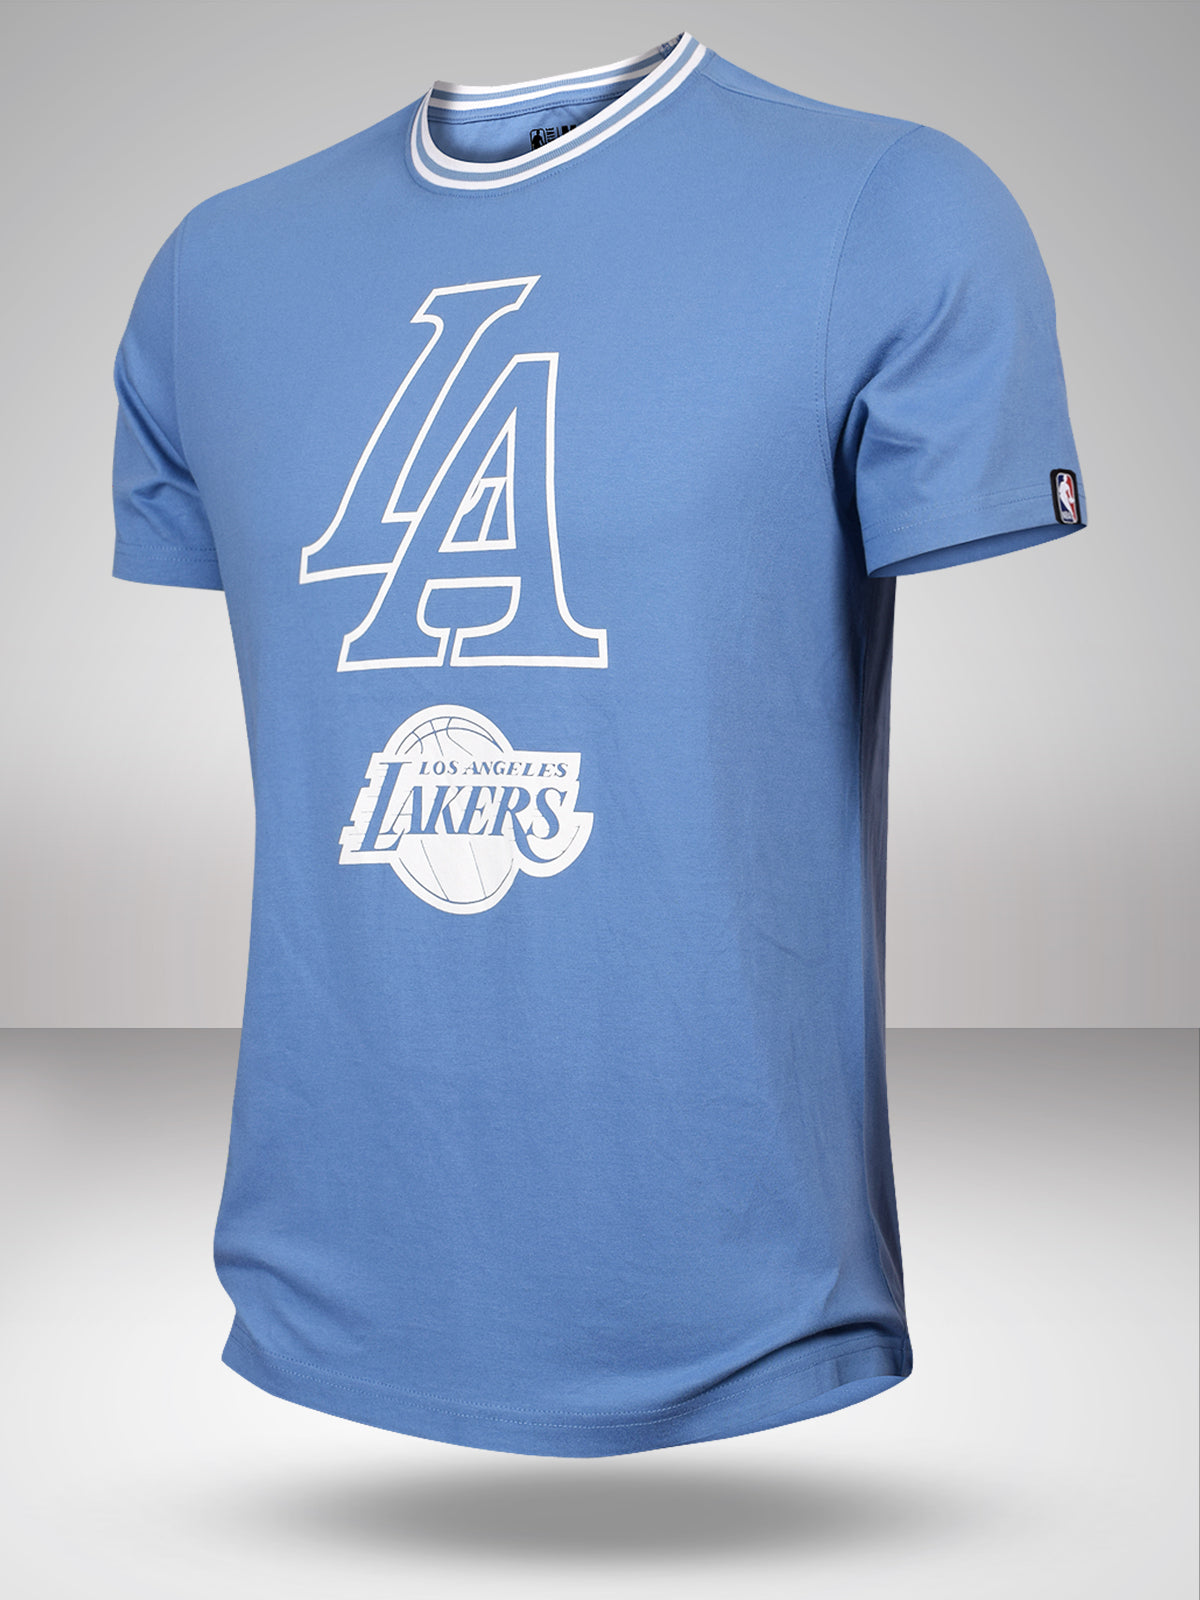 Buy Shop The Arena: NBA: Los Angeles Lakers: Oversized Logo Men's